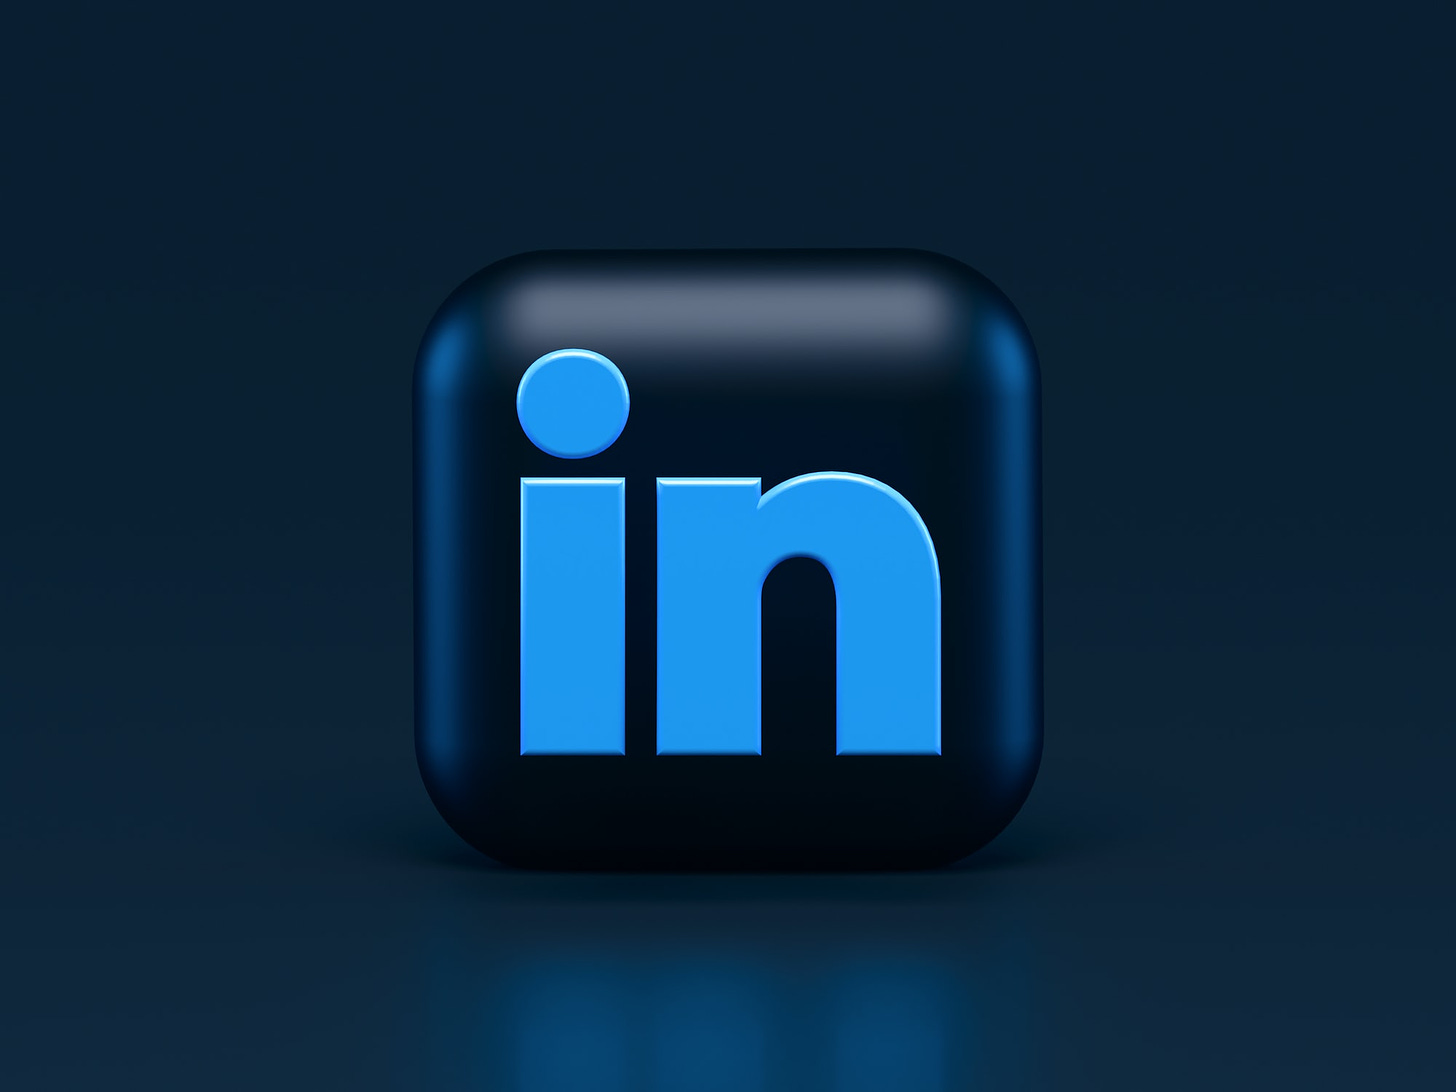 #15 Near real-time personalization at LinkedIn.